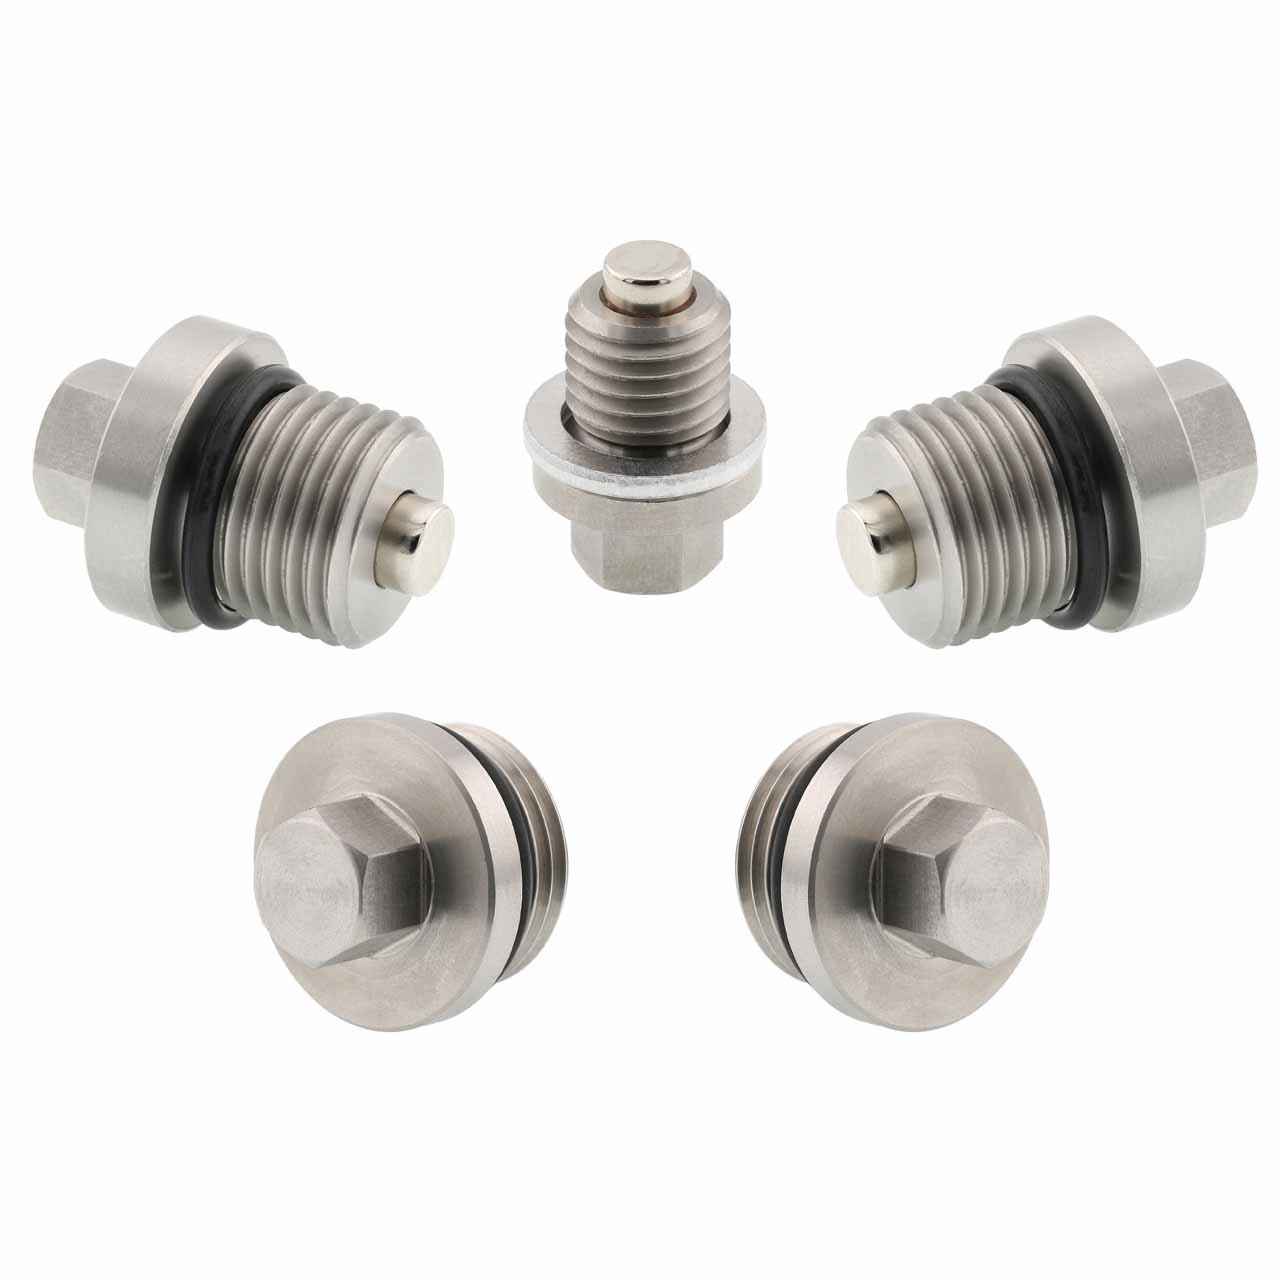 Polaris RZR Turbo S4 Magnetic Oil Drain Plug Kit - 2021-2022 - Engine, Transmission, Differential - Made In USA